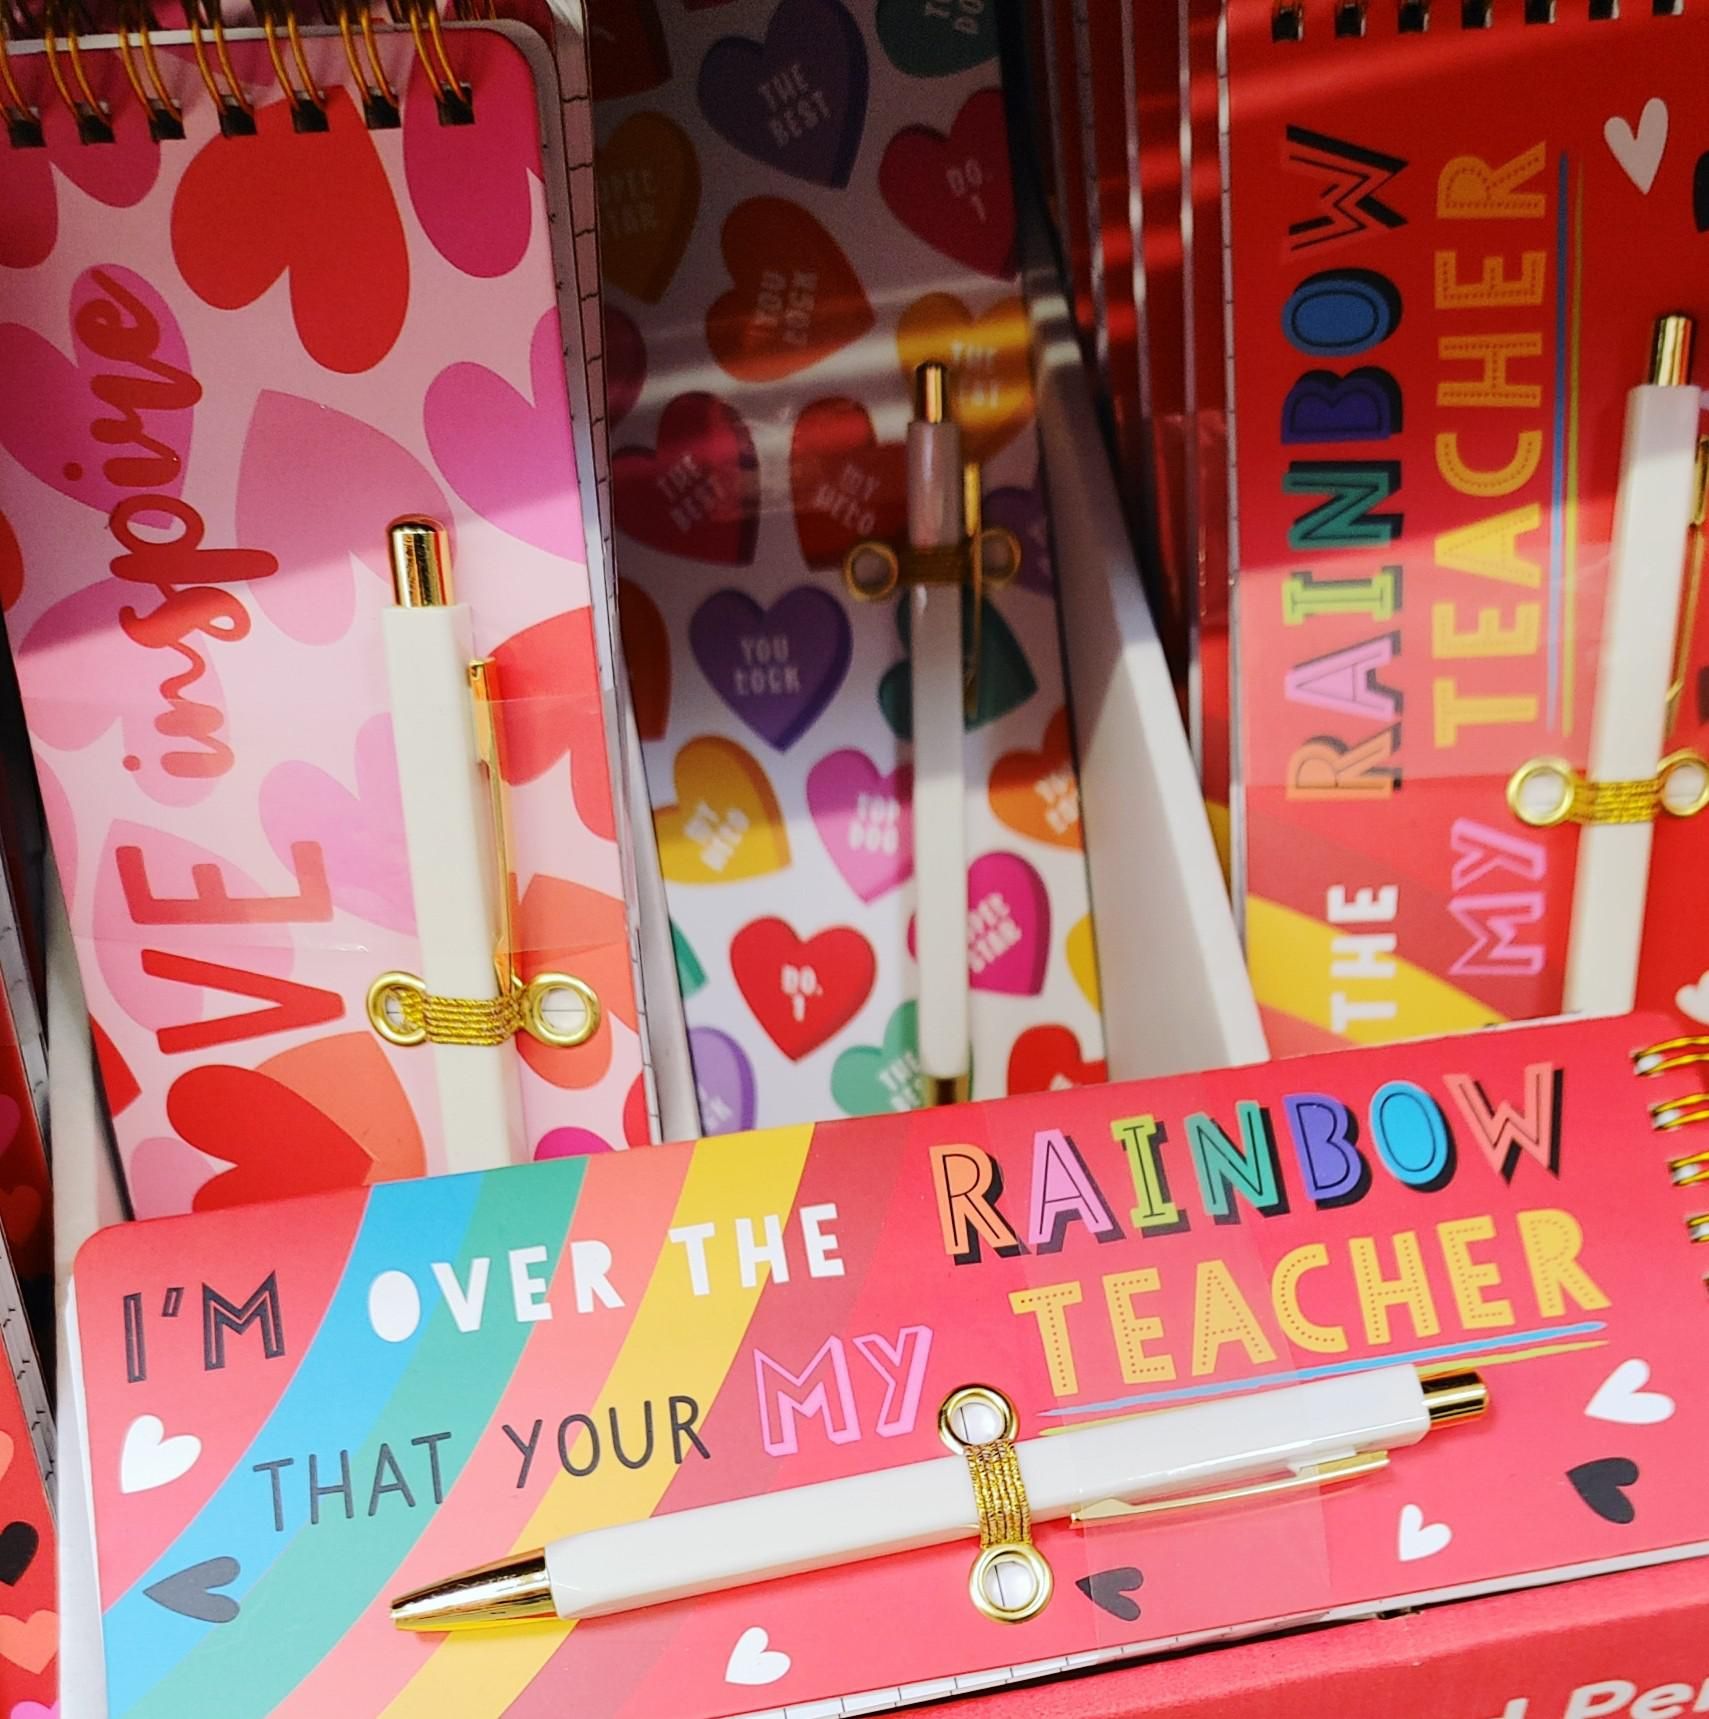 Kids are supposed to give these to their teachers?!